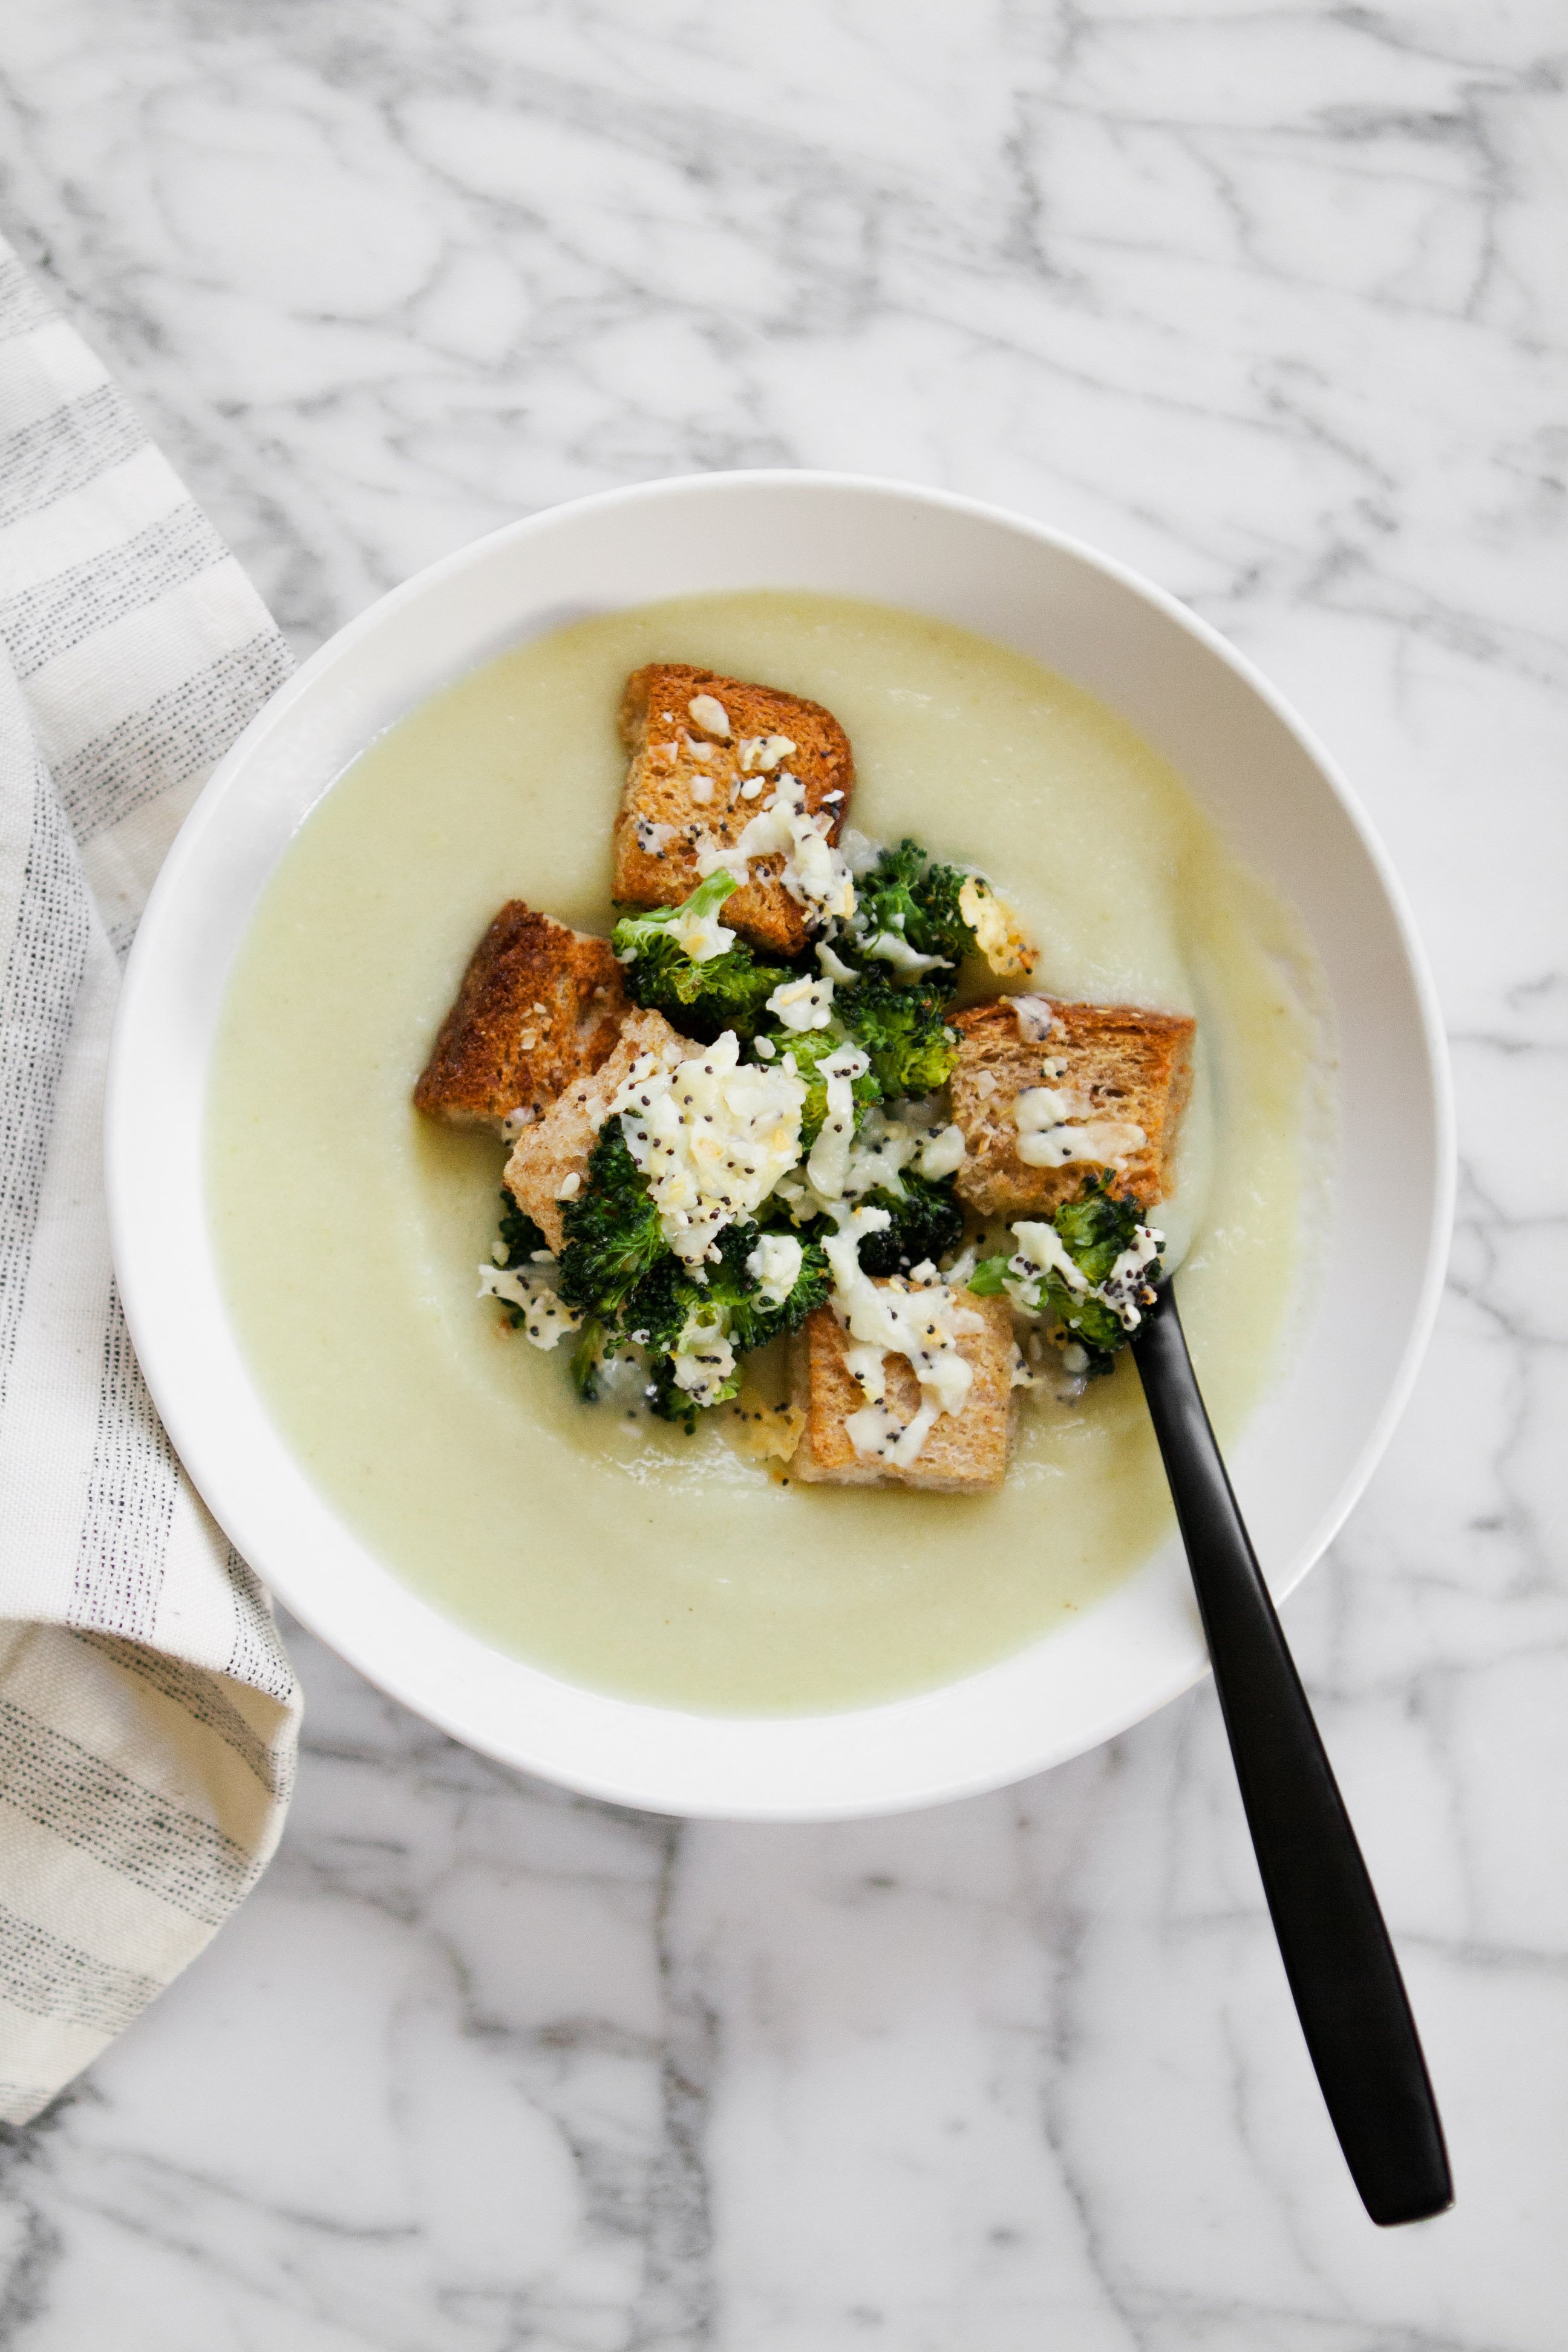 This luxurious, creamy broccoli soup is the perfect weeknight meal. Simmered and puréed broccoli stalks and potatoes offer the perfect creamy texture without making a roux or using cream. Top with cheesy “everything” spiced croutons for a meal that’s healthy, satisfying and delicious. | from Lauren Grant of Zestful Kitchen